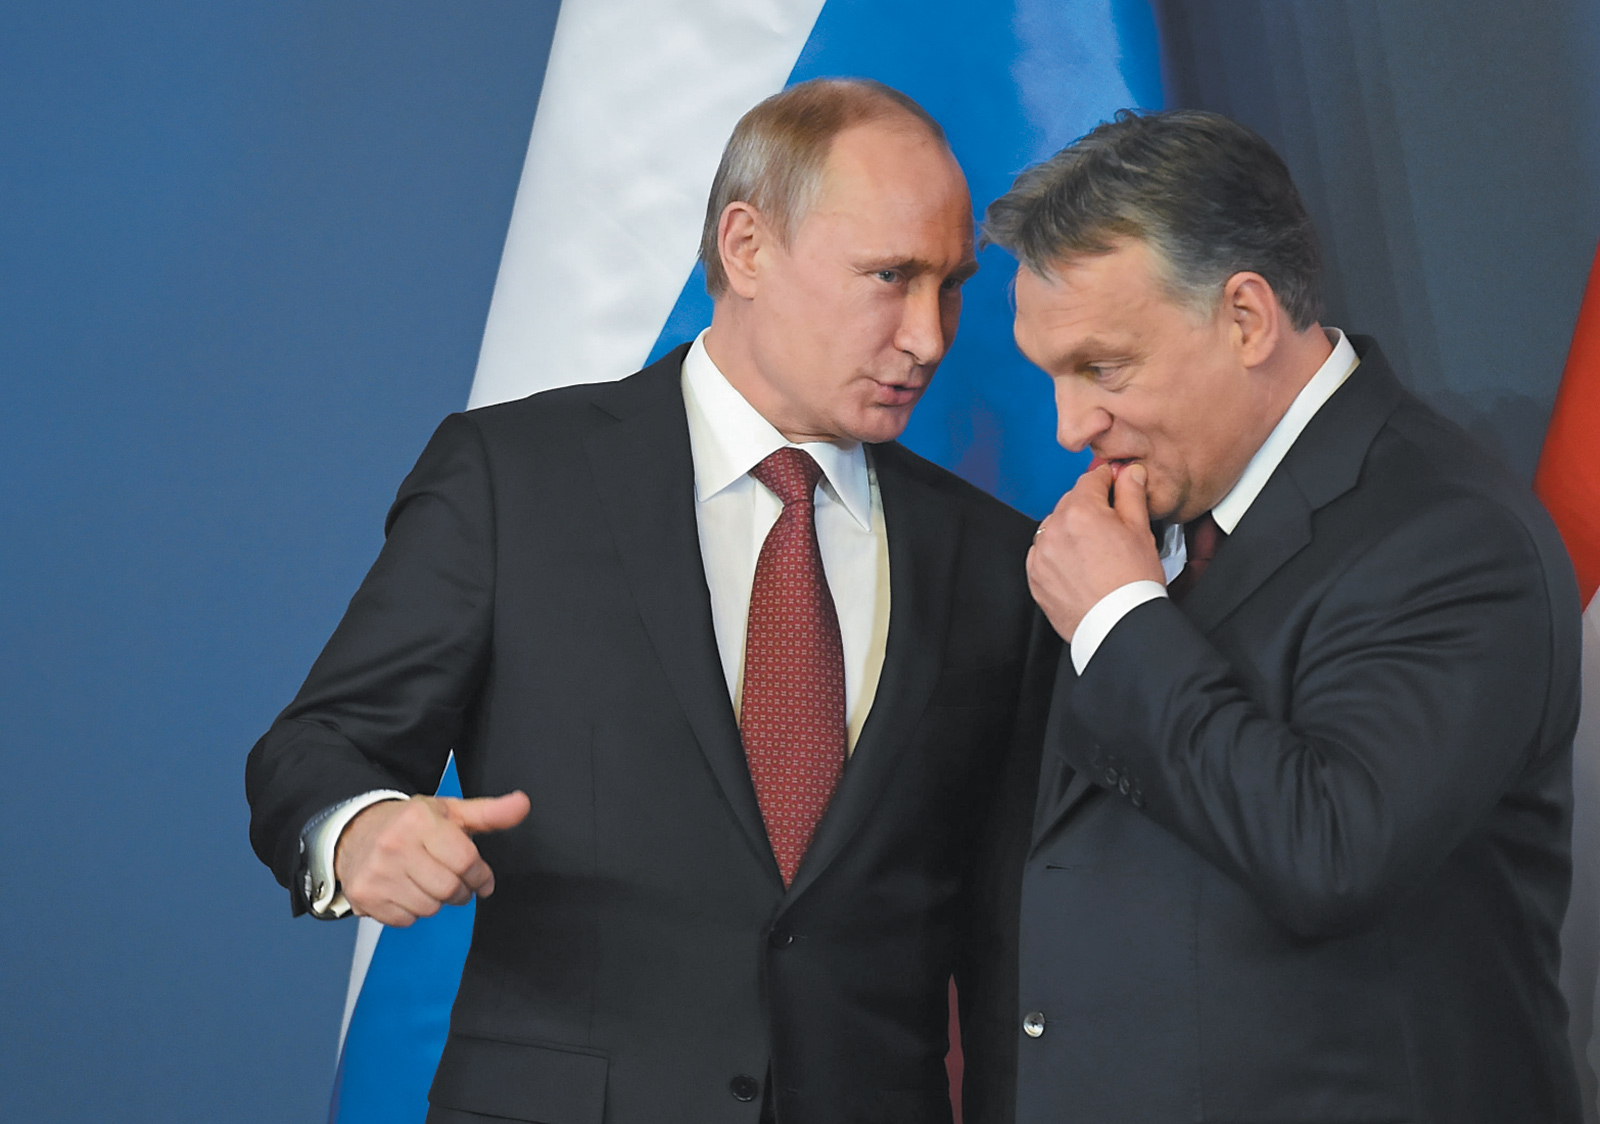 Vladimir Putin and Viktor Orbán at a press conference in Budapest, February 2015